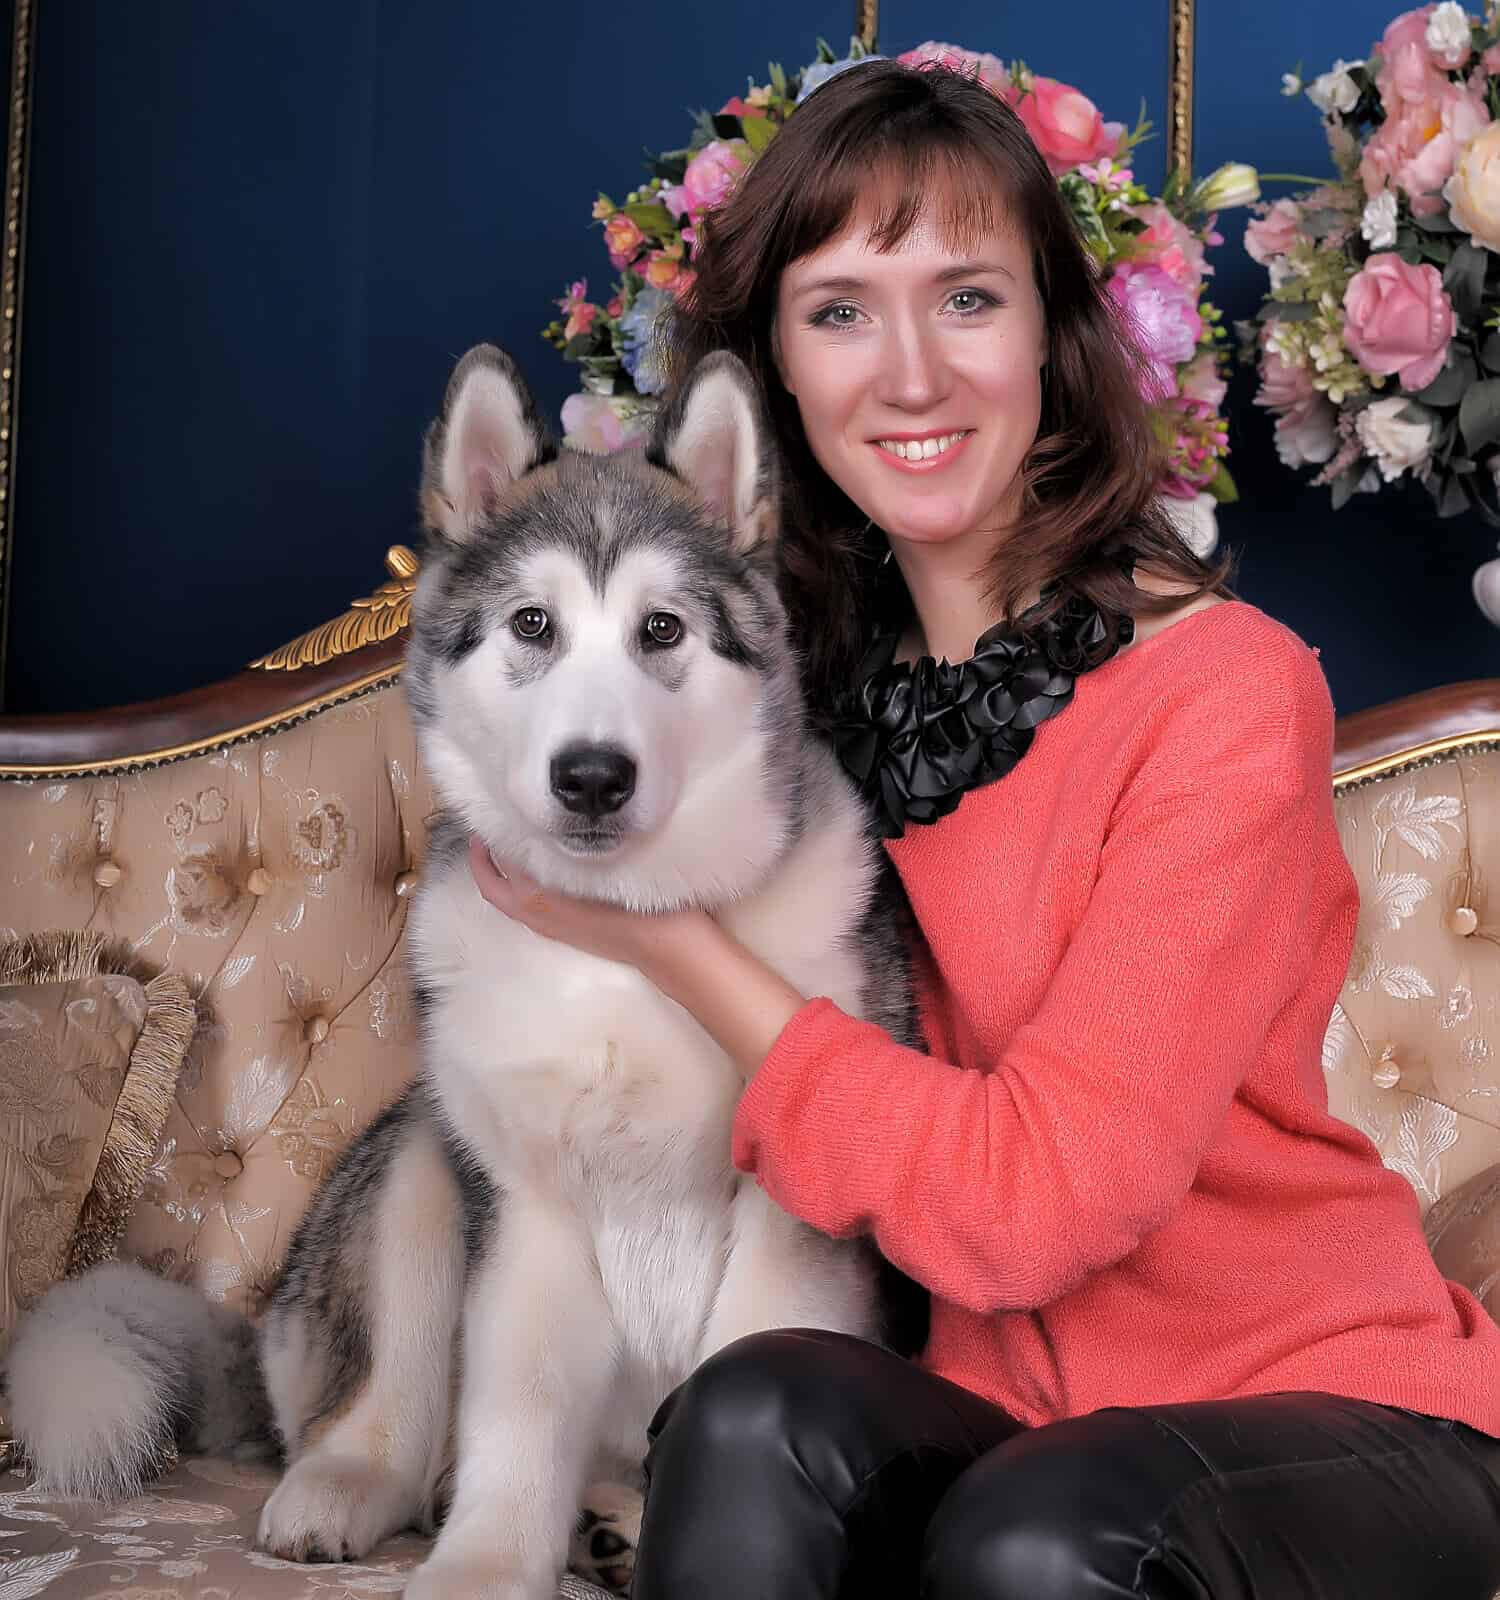 Woman with a puppy Malamute. Happy, adorable.